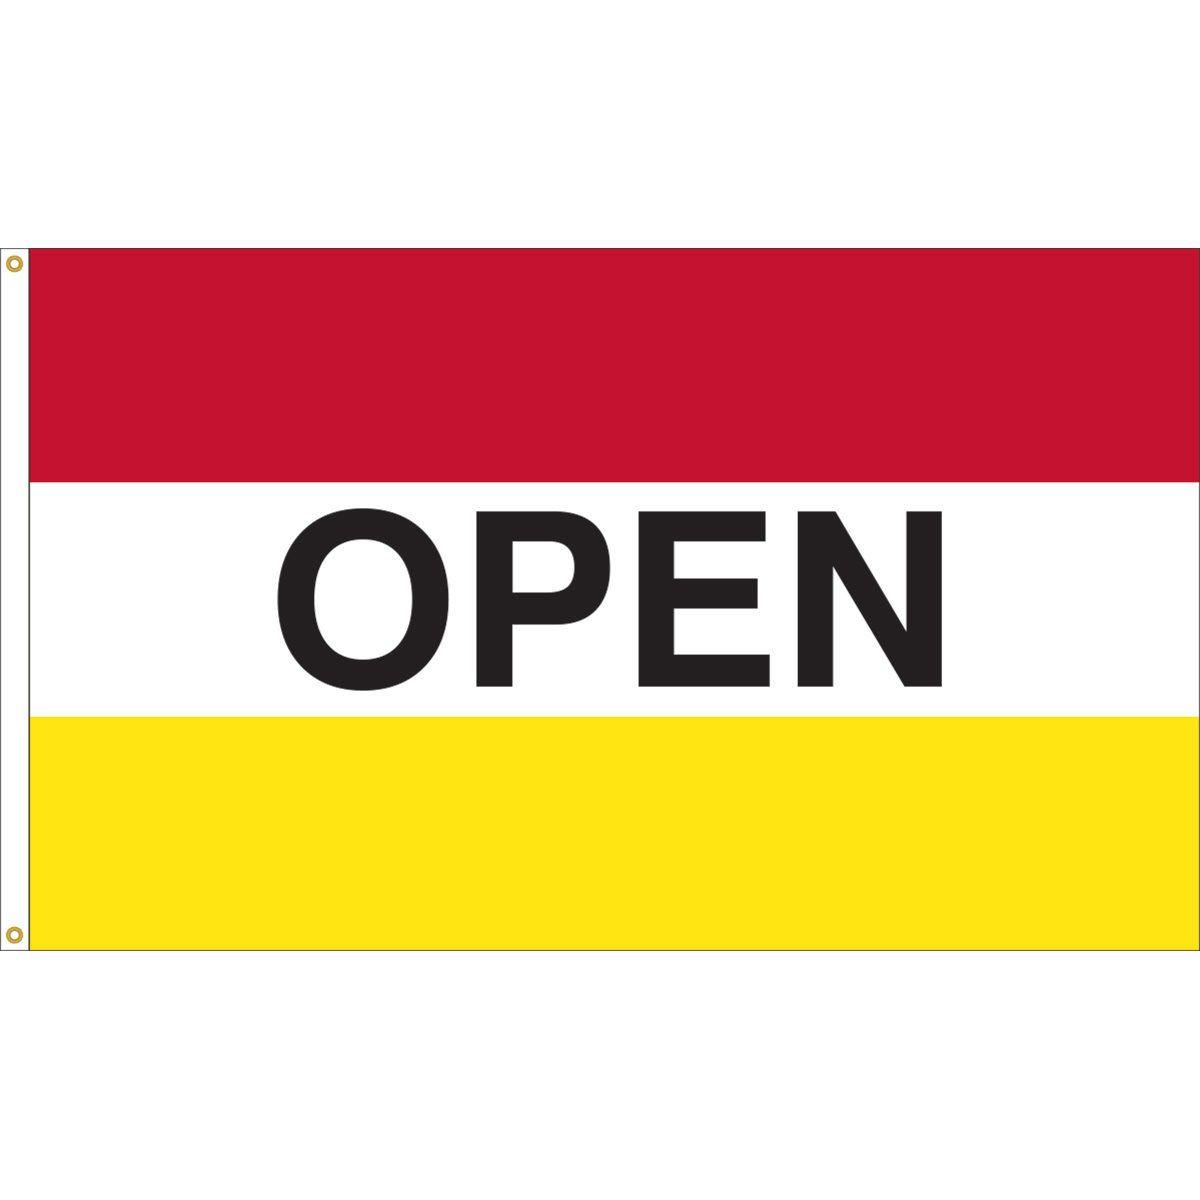 Red White and Yellow Brand Logo - OPEN Flag